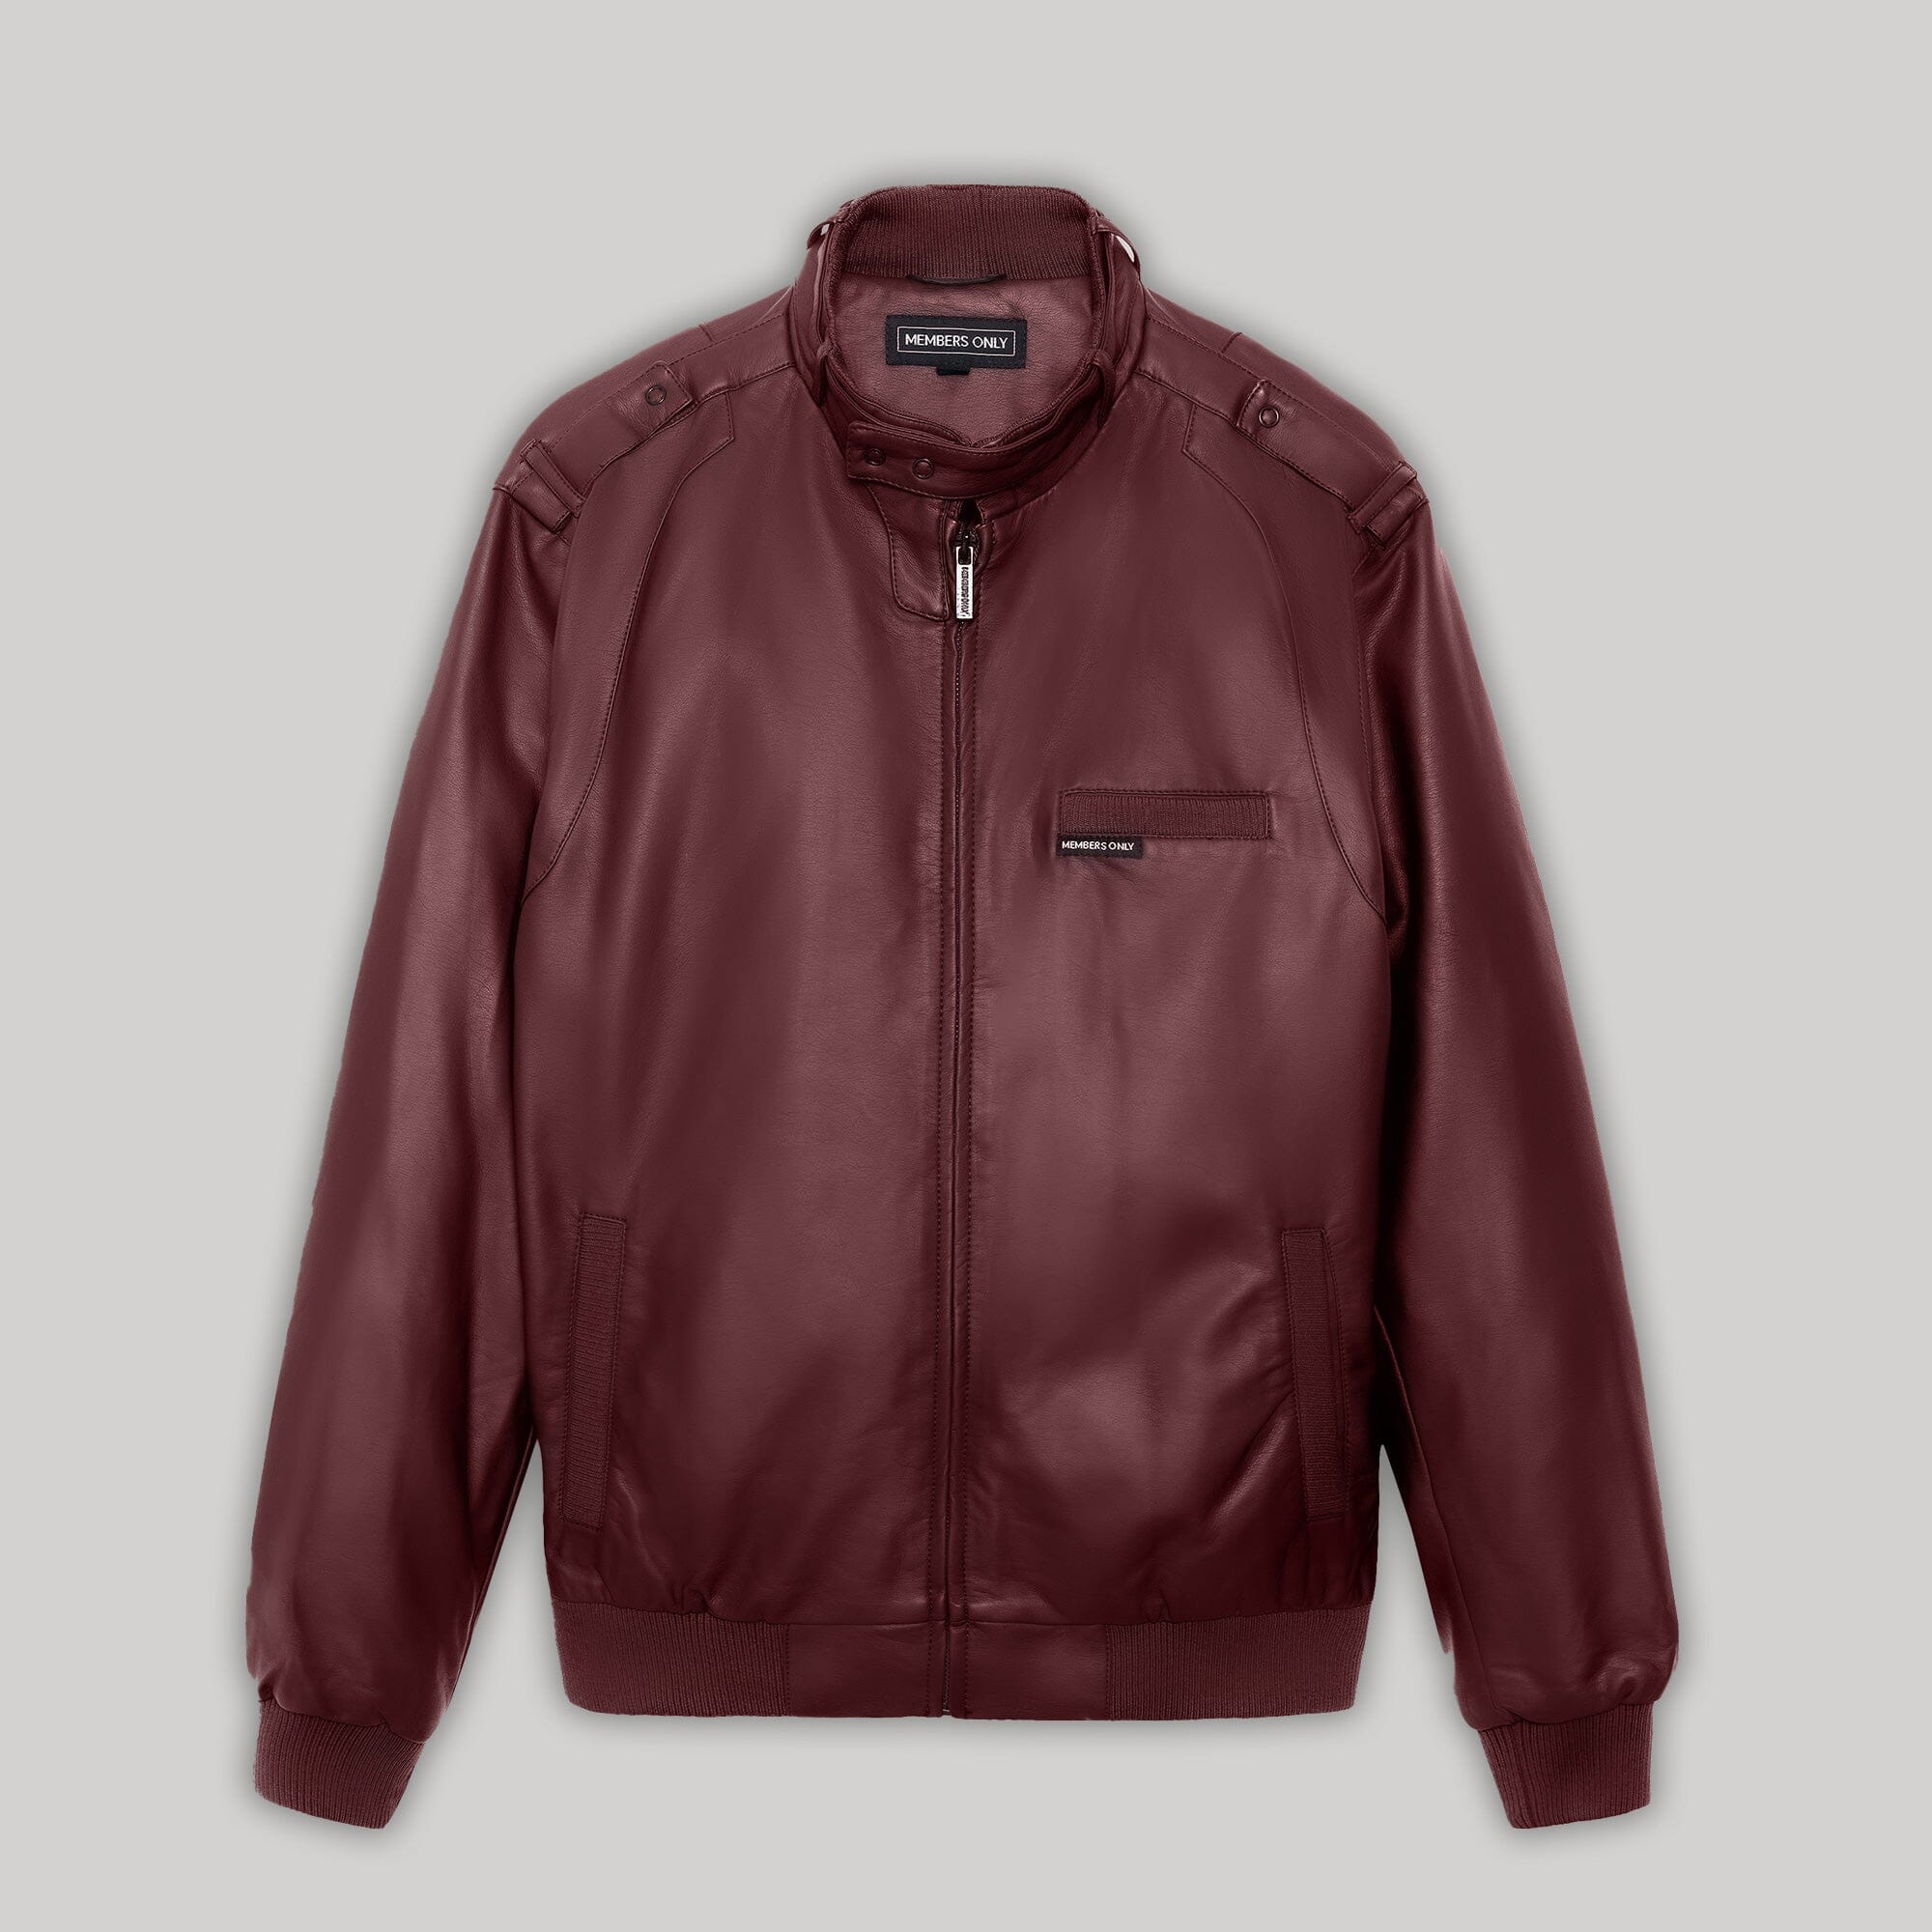 Members Only Men's Faux Leather Iconic Racer Jacket (Dark Brown, Medium) at   Men's Clothing store